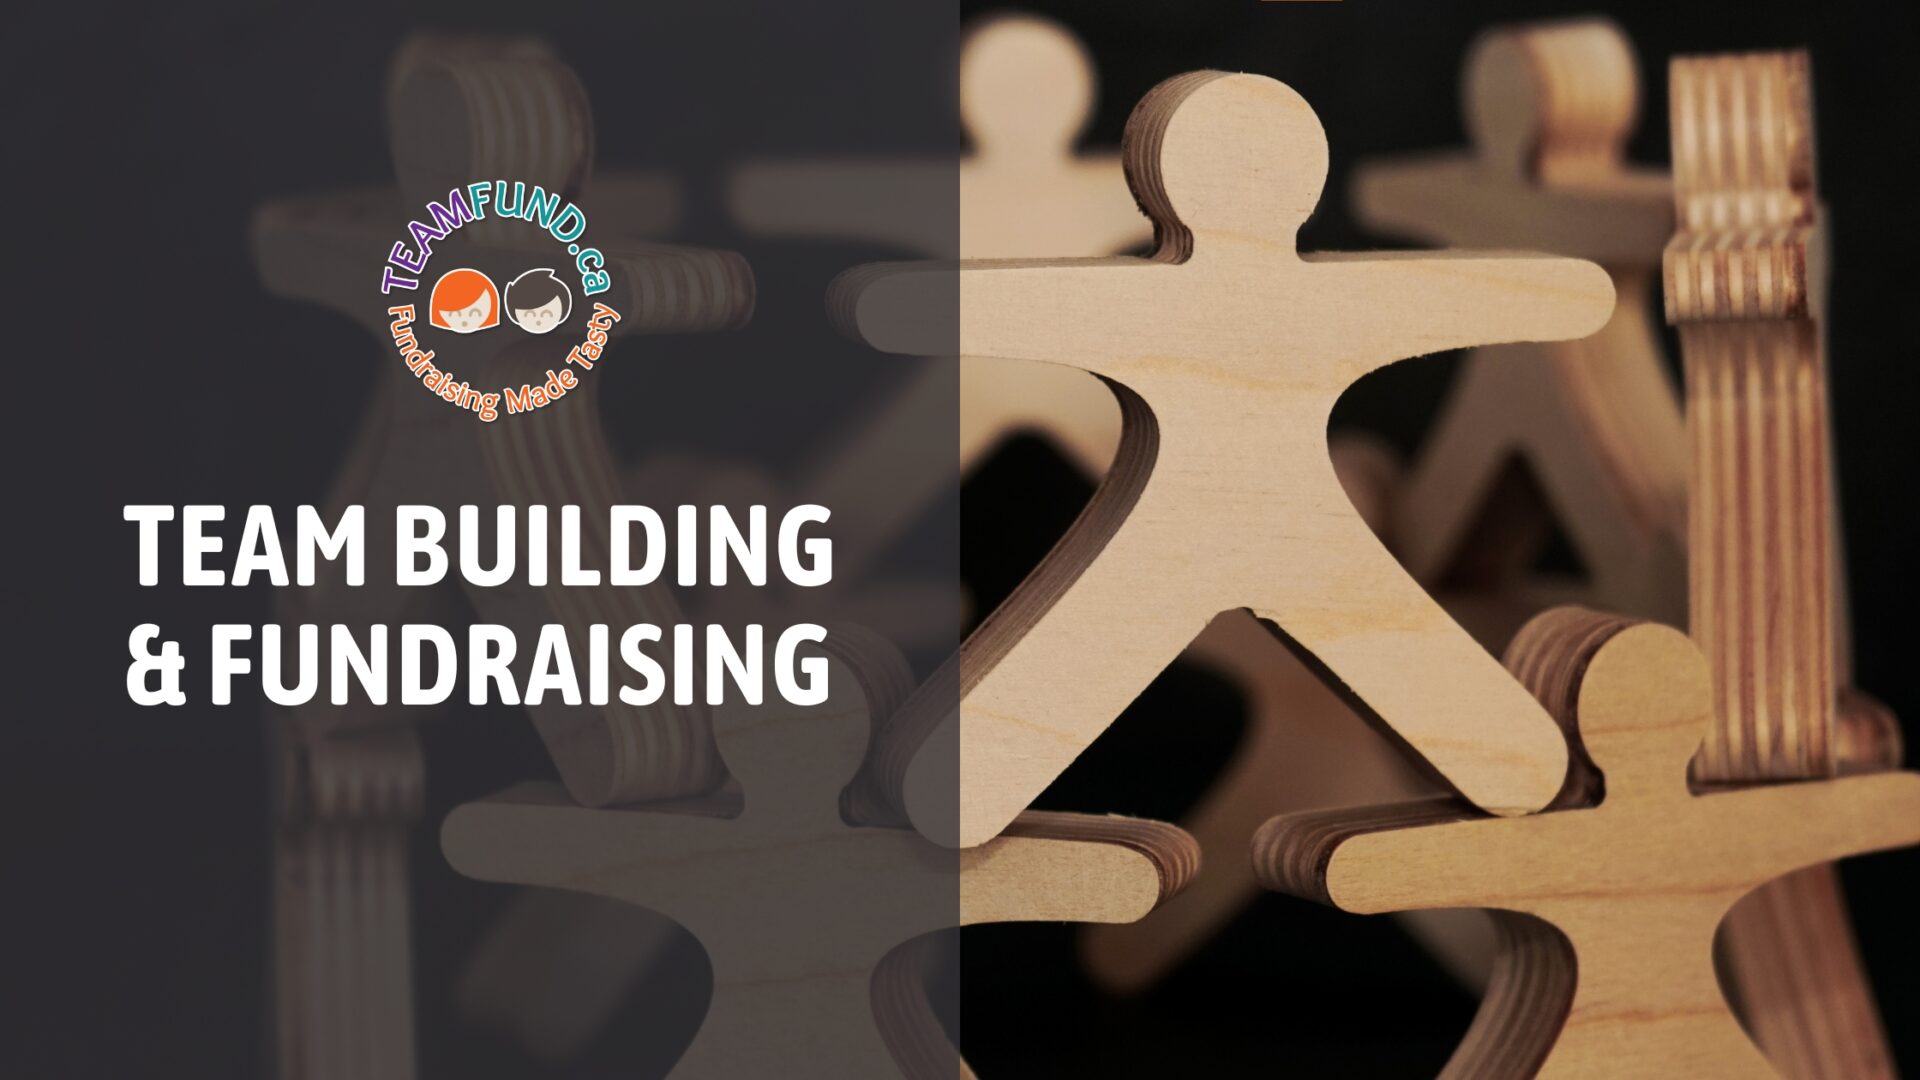 Team Building and Fundraising: Fundraising Gives Back